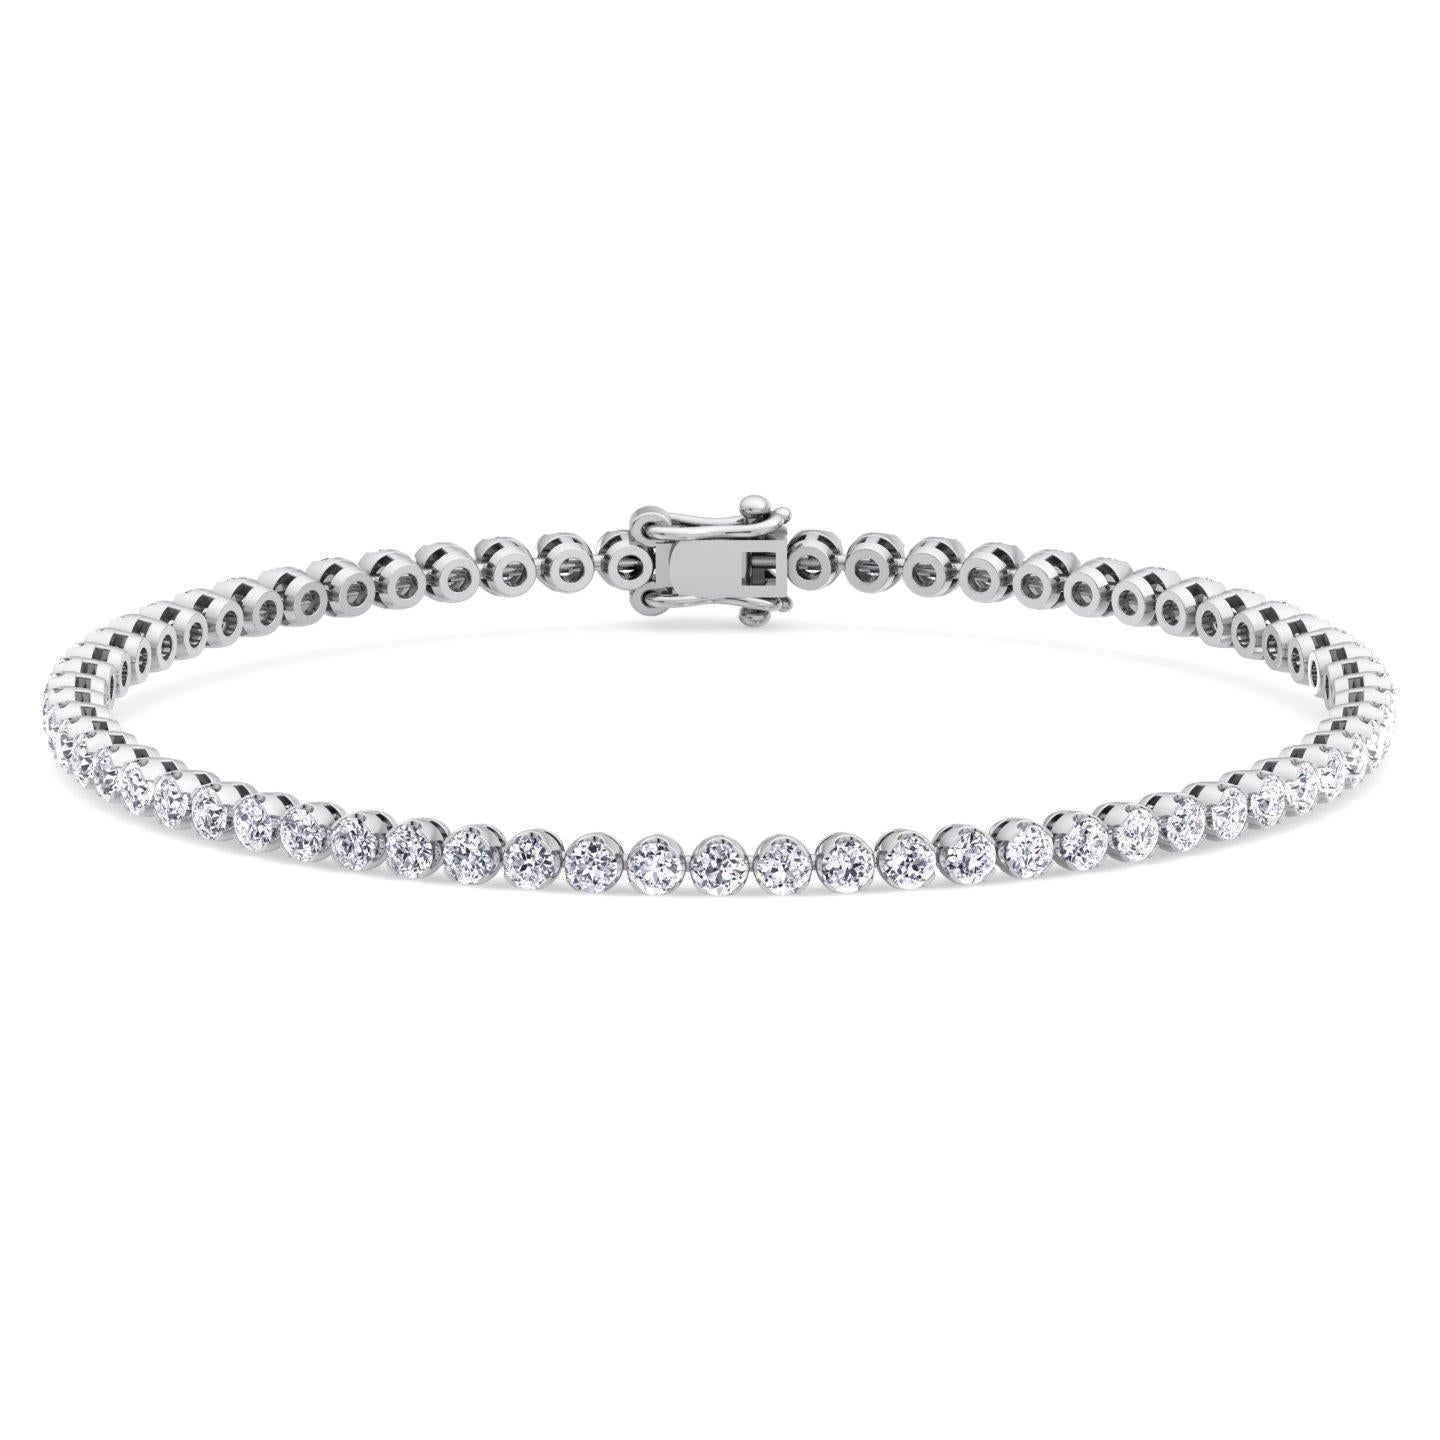 This Exquisite Crown Prong Diamond Tennis Bracelet is a fan favorite. The illusion setting on this bracelet makes the diamonds appear bigger than they are, which gives the diamonds an even bigger sparkle making you shine through your